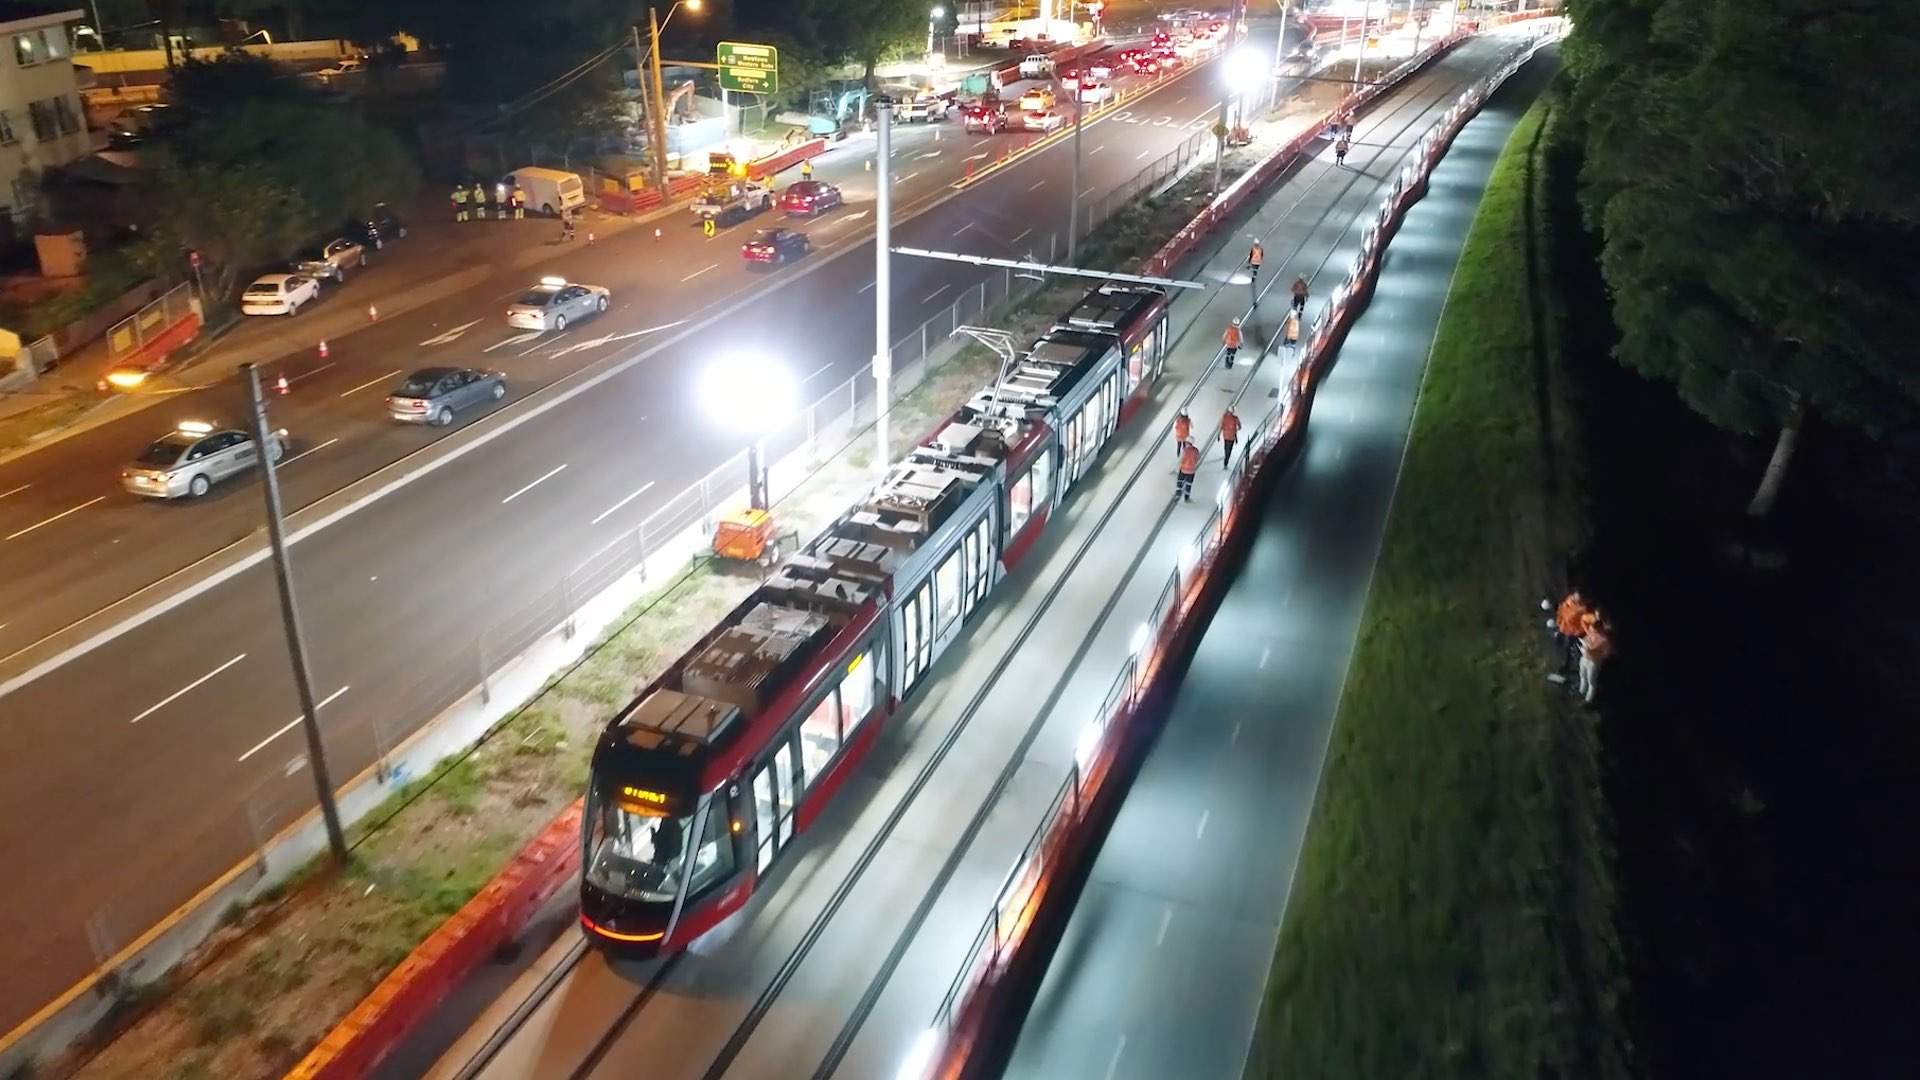 The First Tram Has Run on Sydney's New CBD and South East Light Rail System